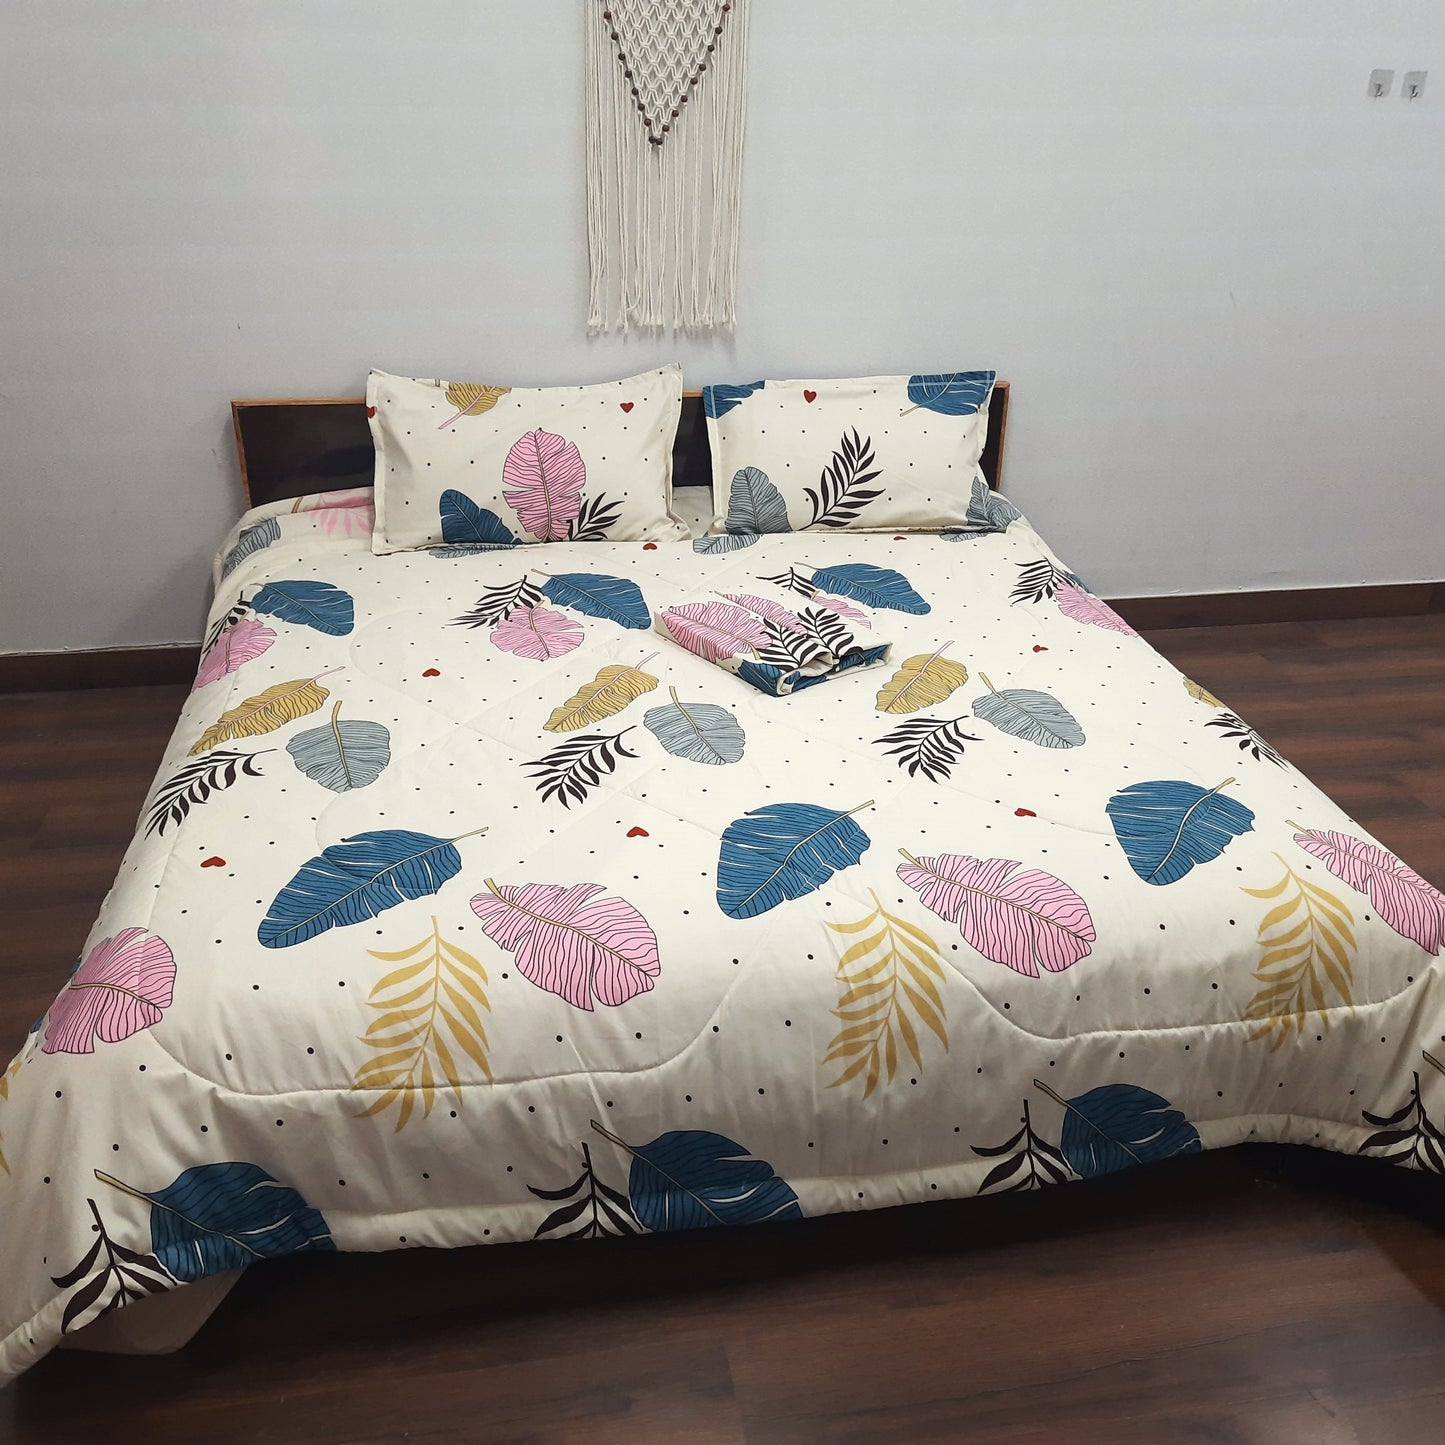 Save big on our AvioniHome Lavanya Bedding Bundle |1  Double Bed Comforter, 1 Double Bed Sheet, and 2 Pillow Covers Combo - Set of 4